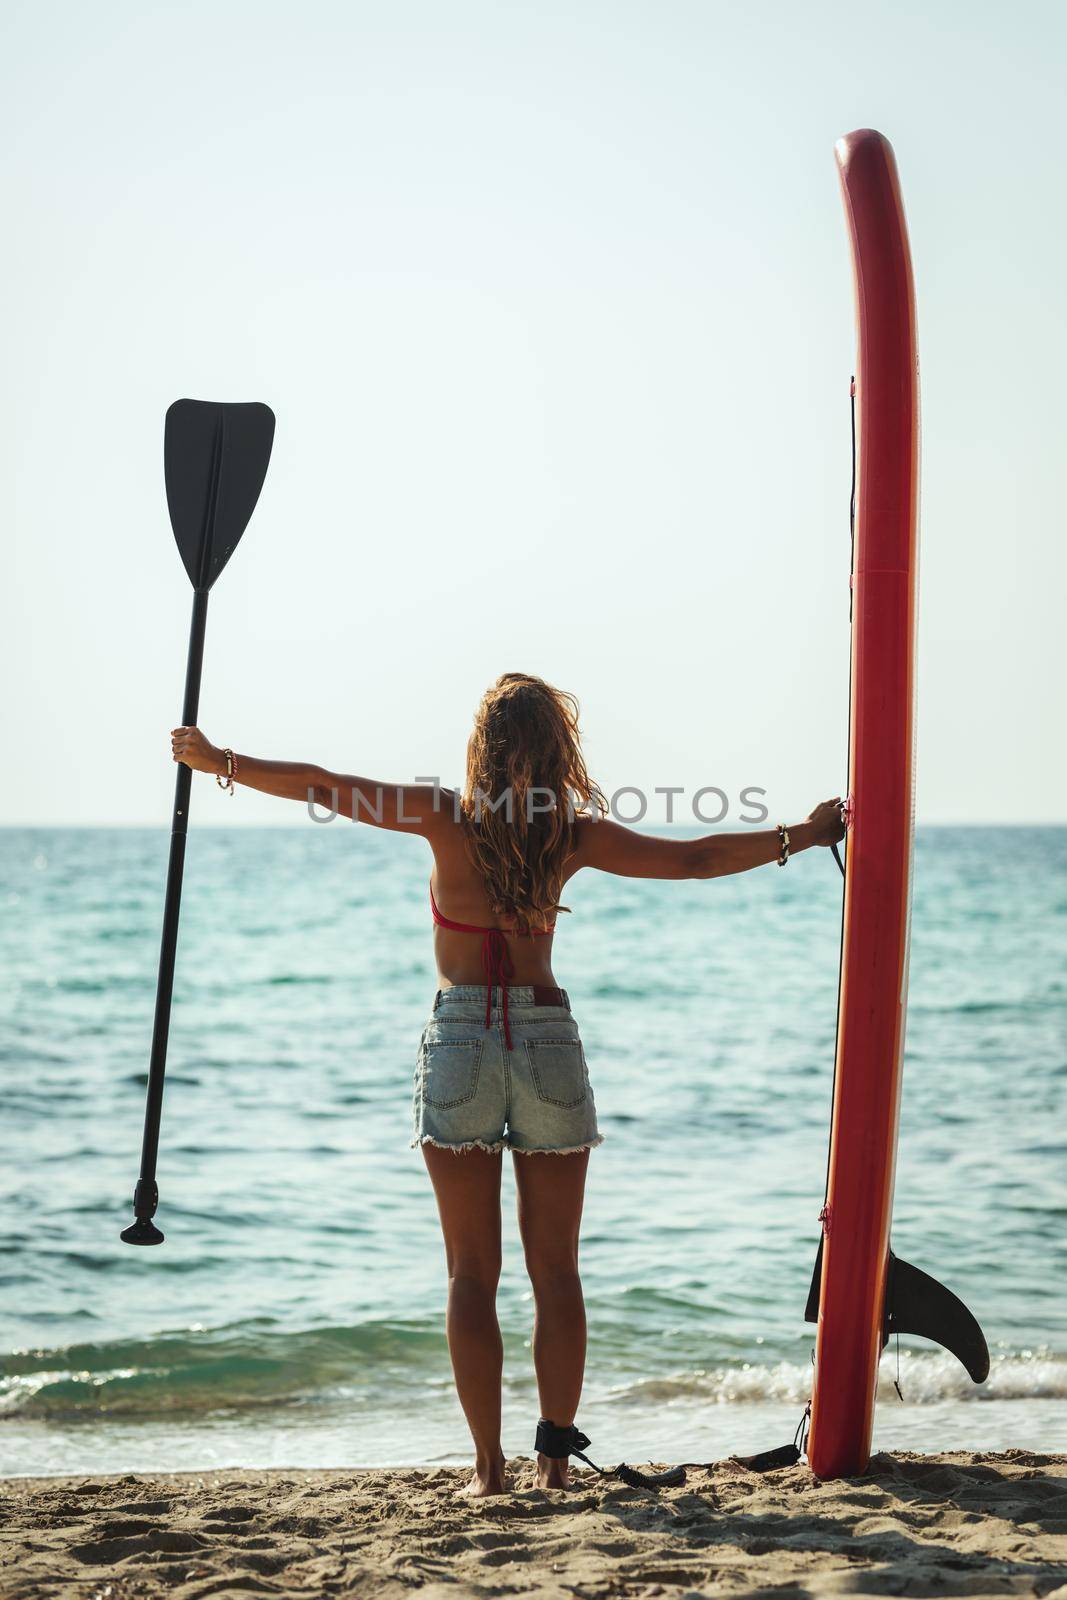 A young woman on a sea beach with a surfboard is ready for the waves.